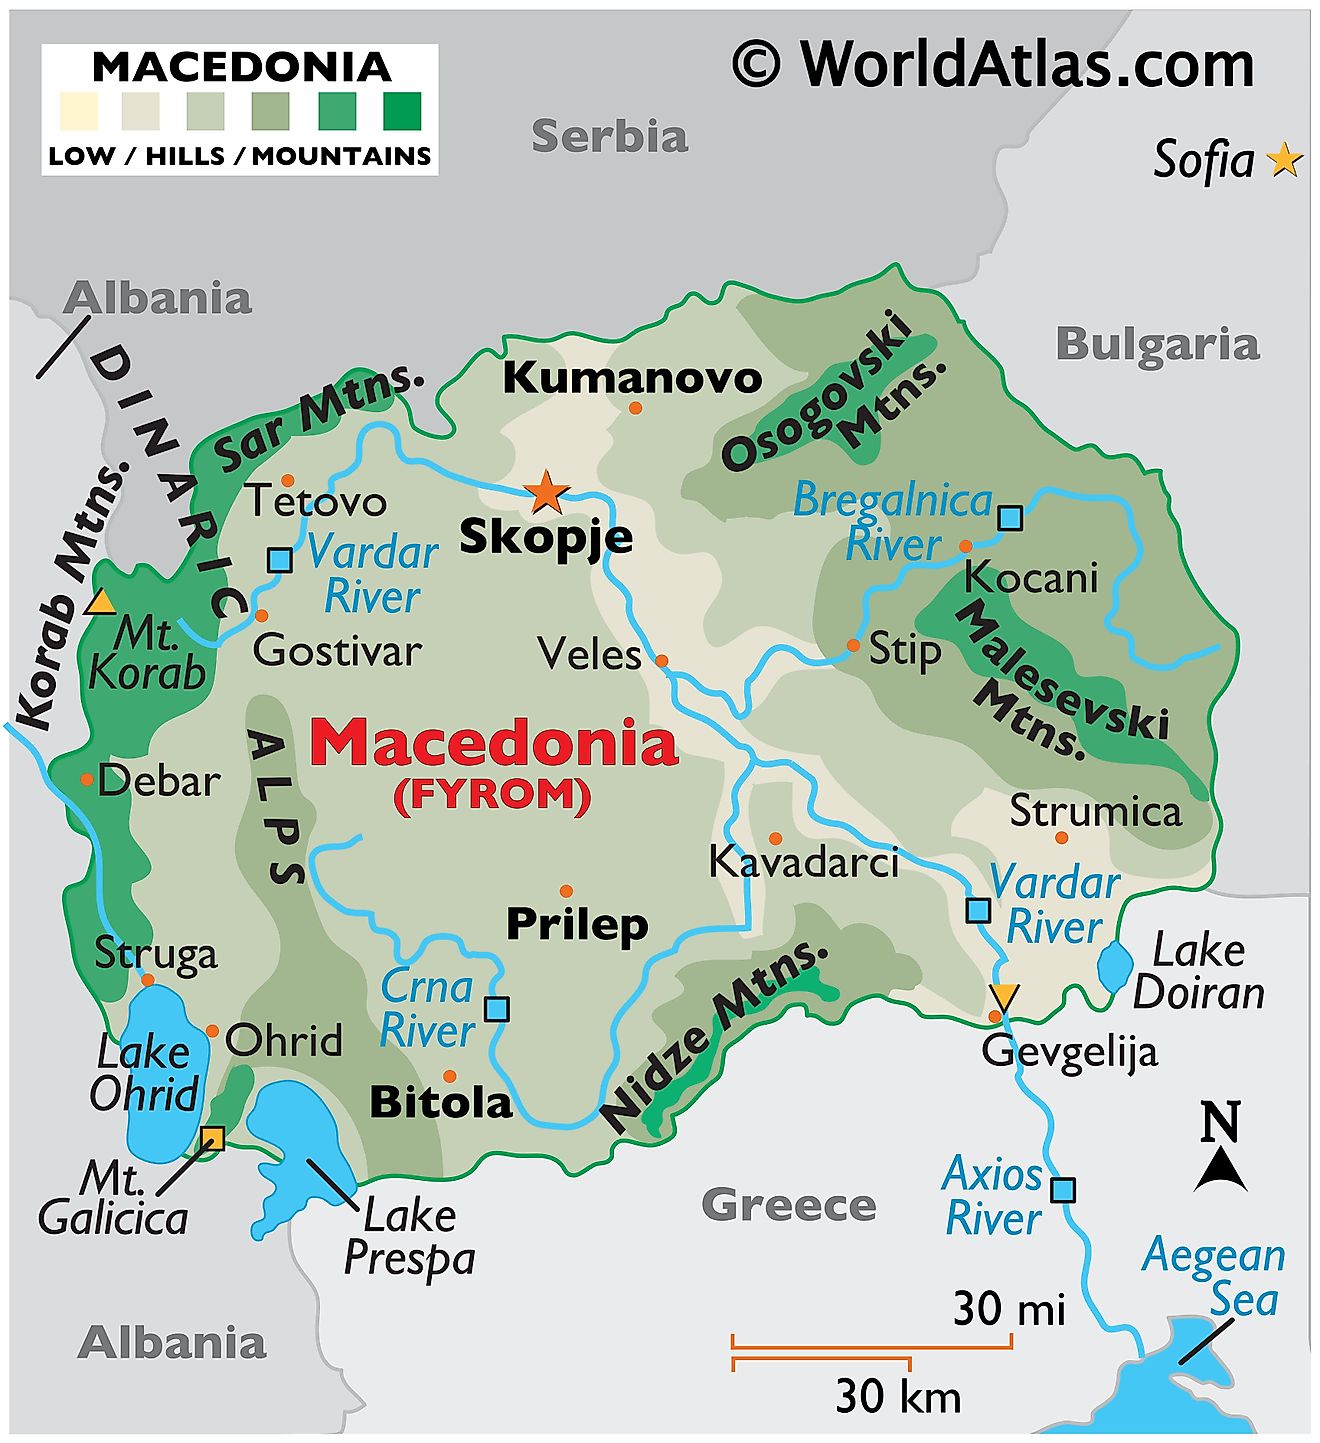 Physical Map North Macedonia showing relief, major mountain ranges, rivers, important cities, major lakes, bordering countries, etc.